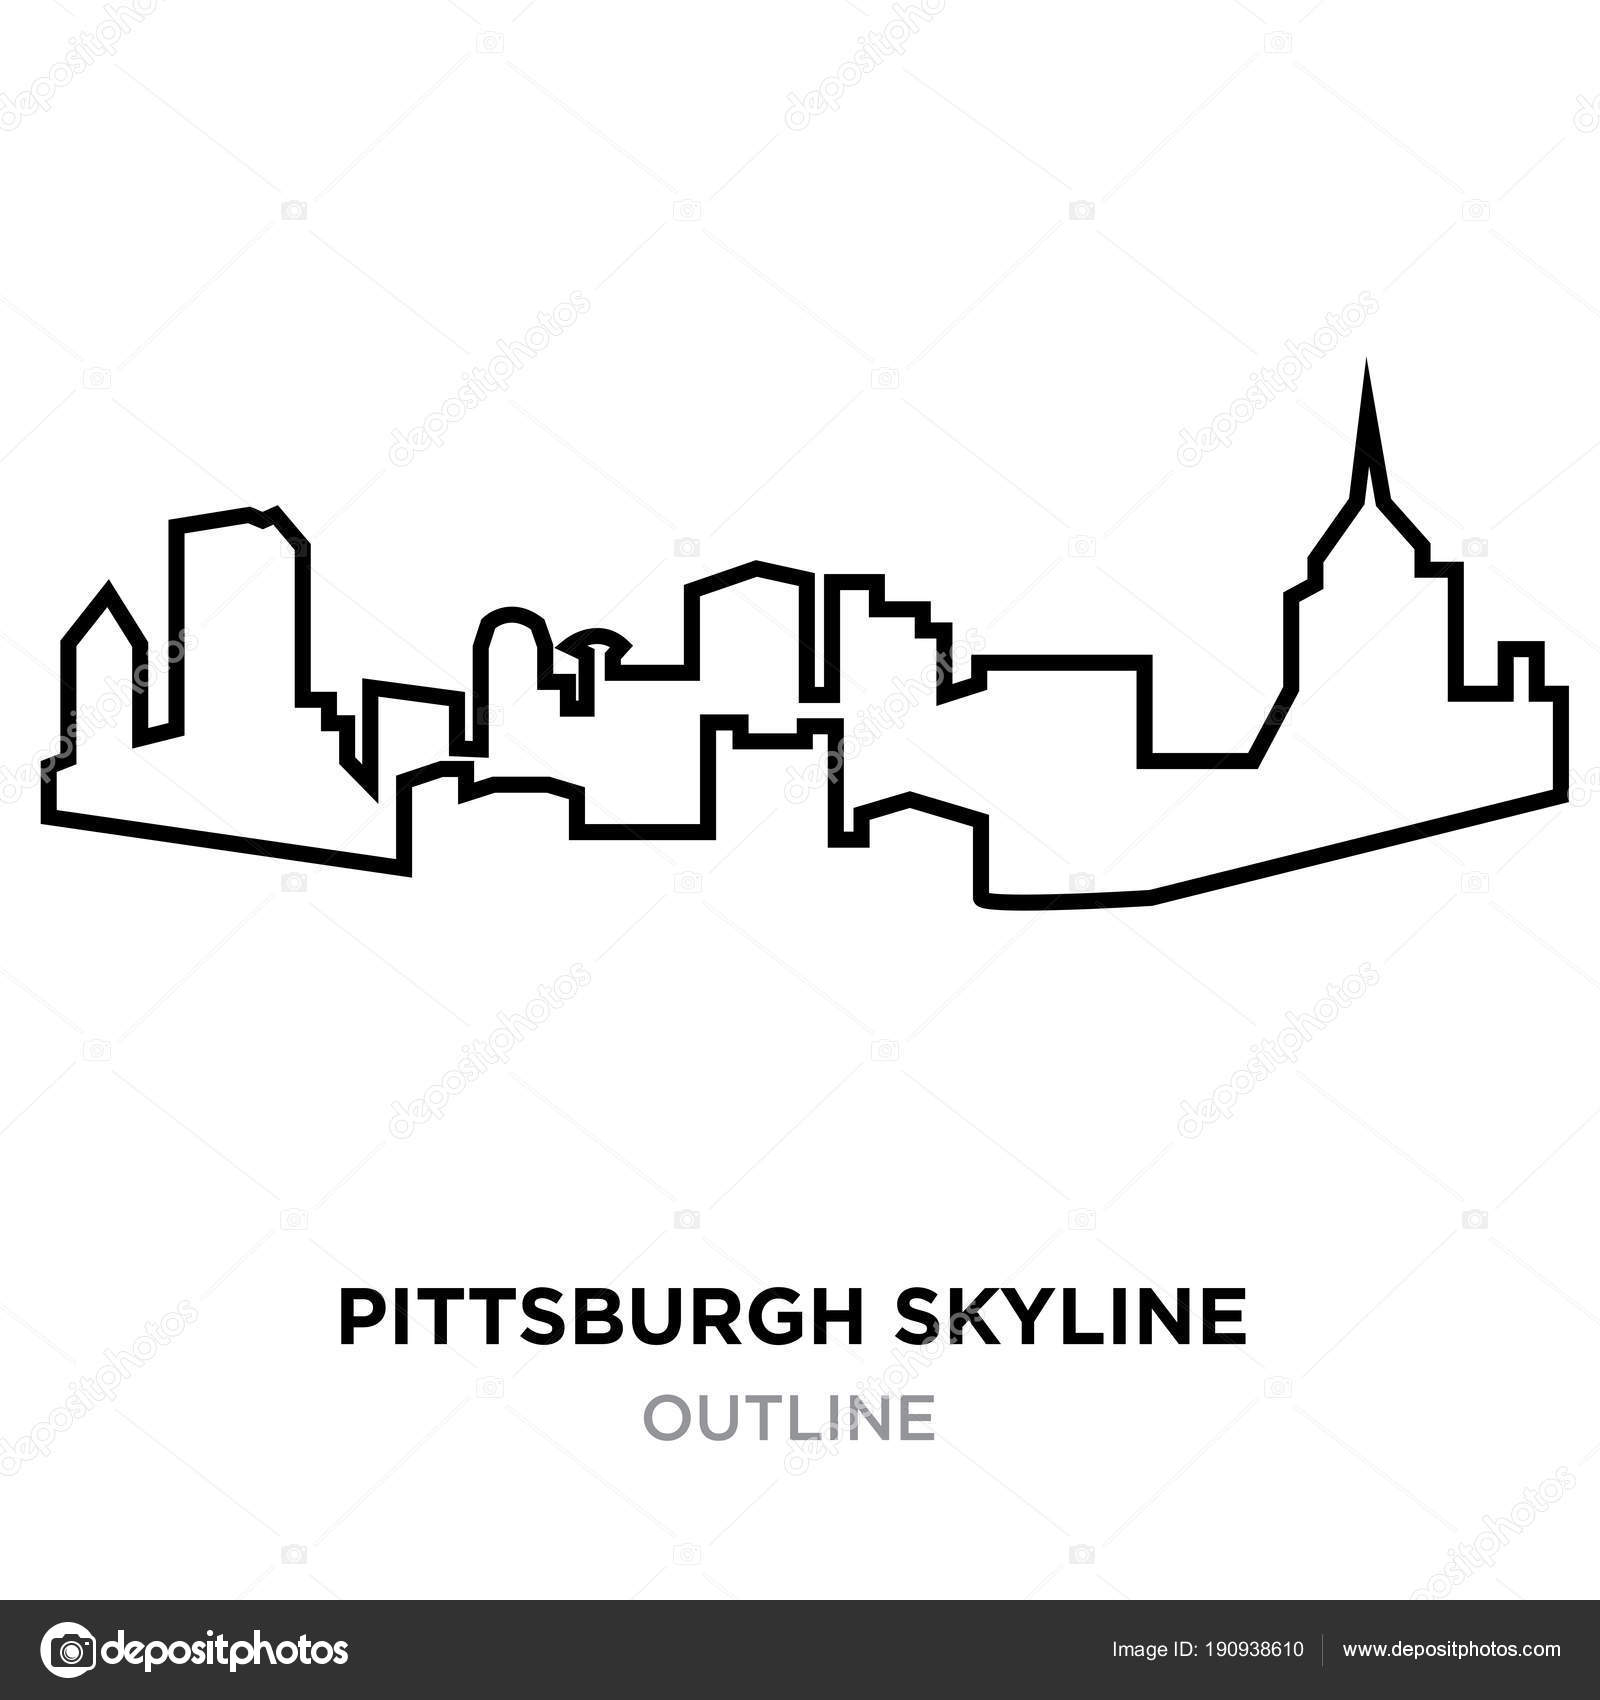 117 Pittsburgh Skyline Silhouette Vector Images Free Royalty Free Pittsburgh Skyline Silhouette Vectors Depositphotos